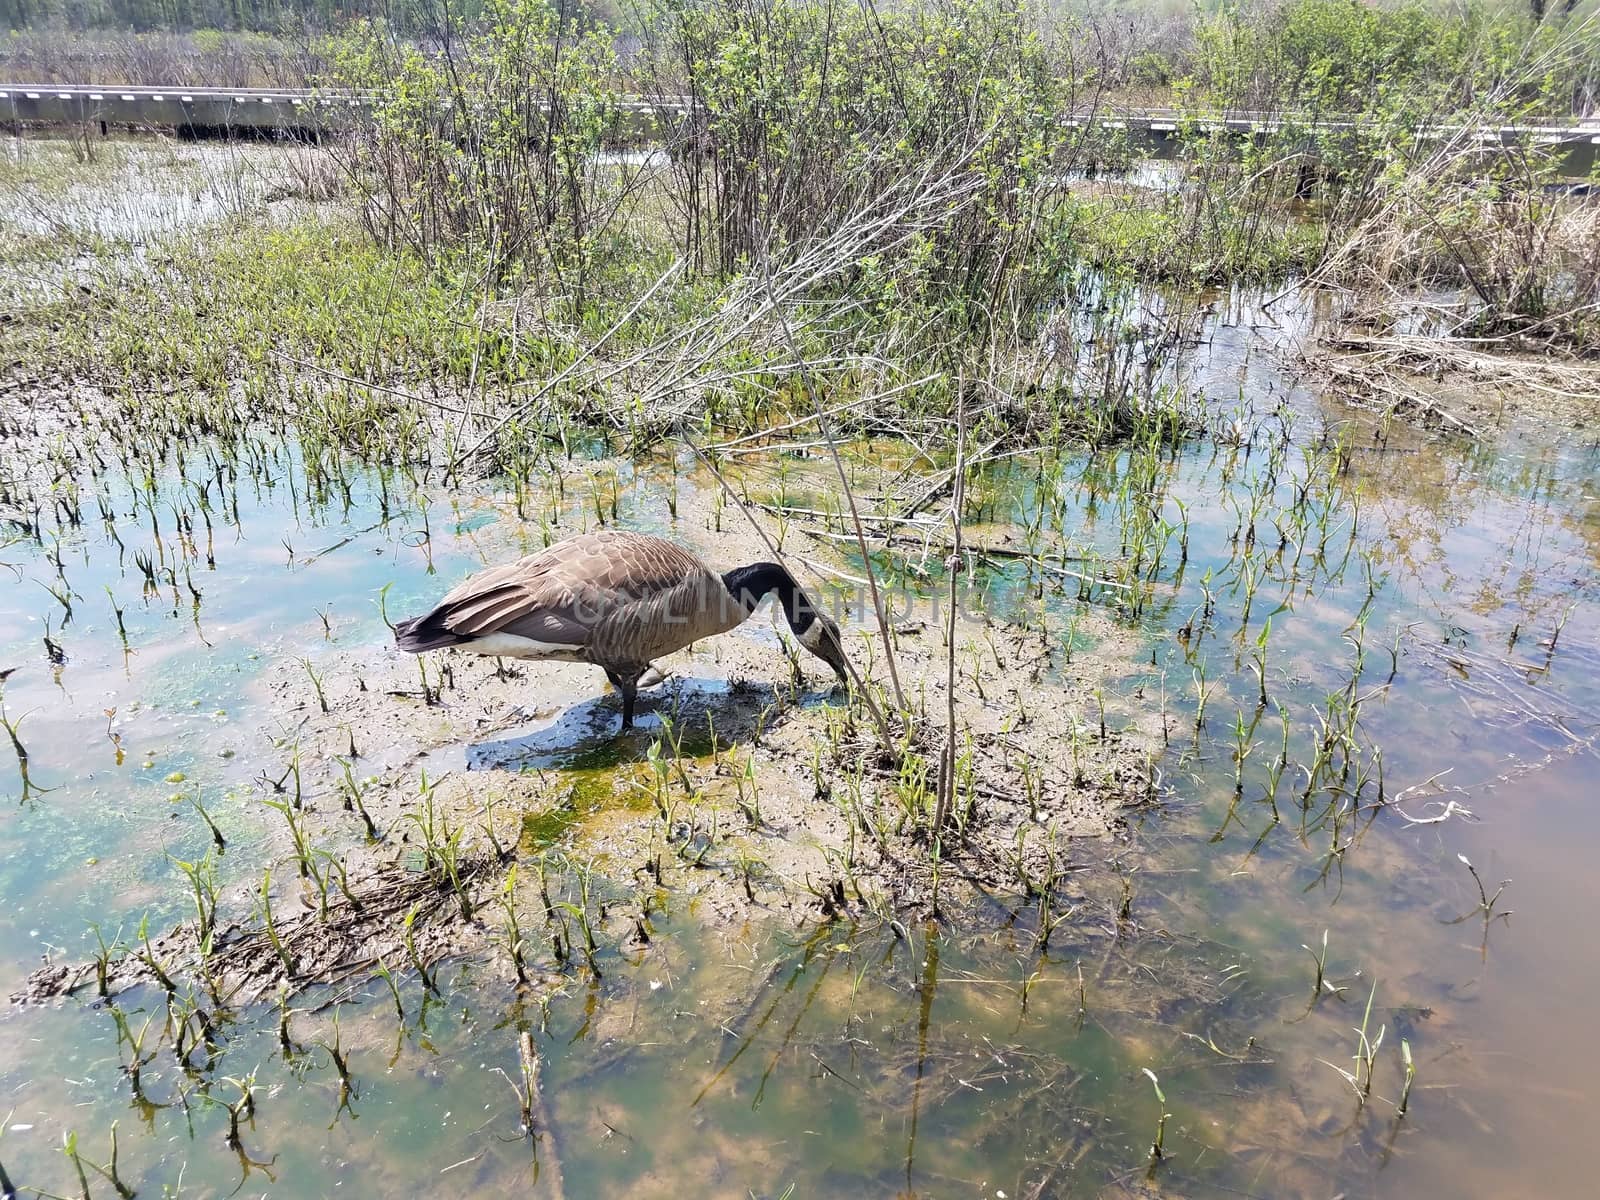 goose eating in muddy water with plants and algae by stockphotofan1